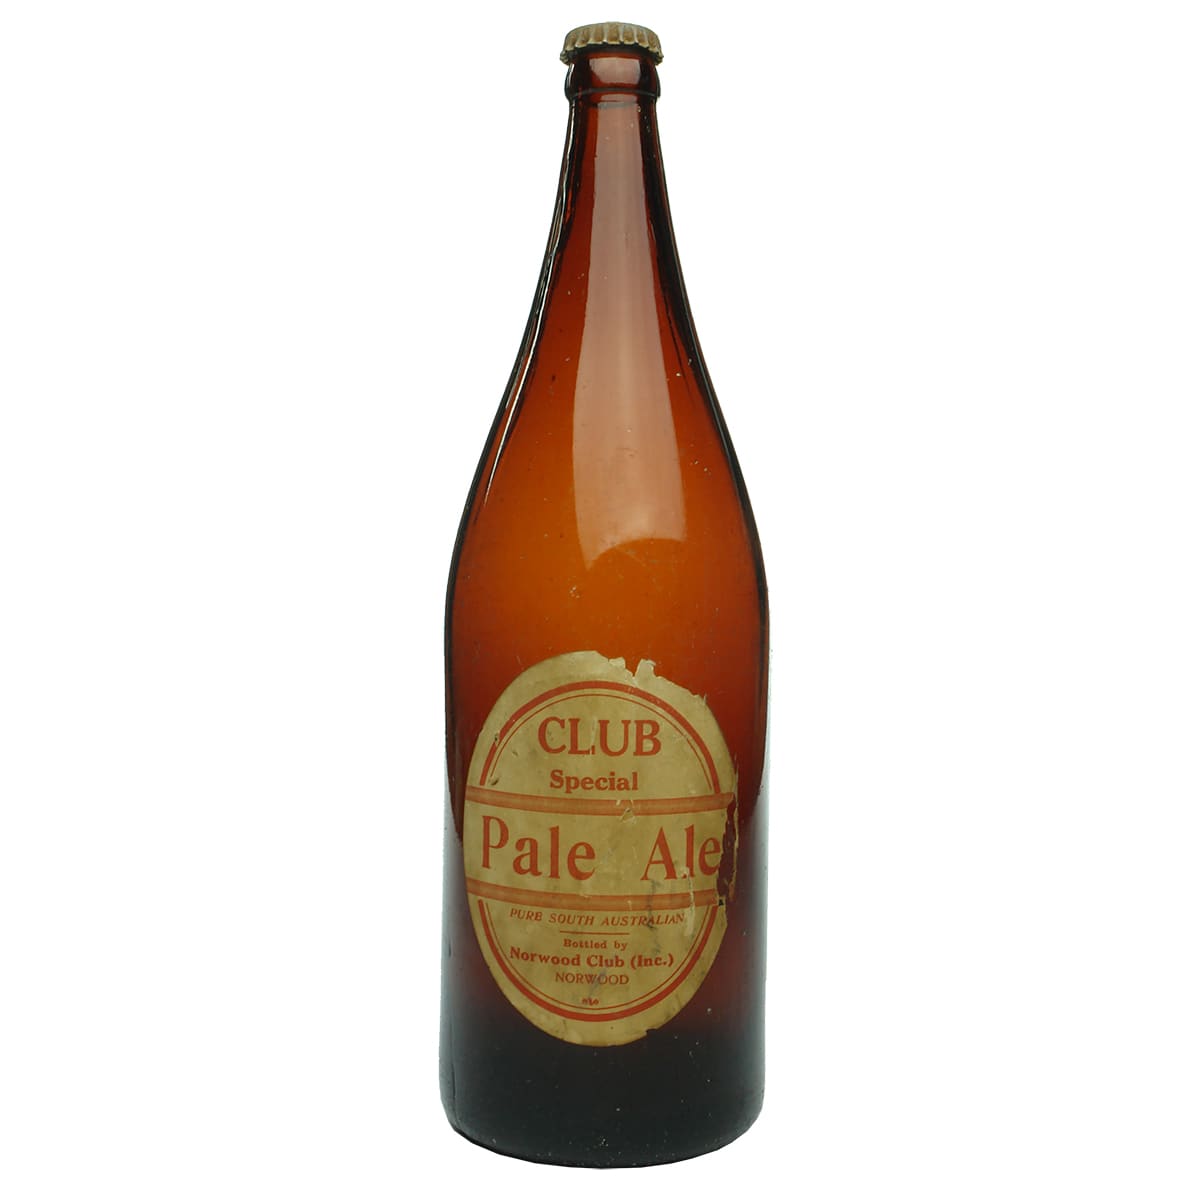 Crown Seal Beer. Labelled for Norwood Club Special Pale Ale. Amber. Quart. (South Australia)